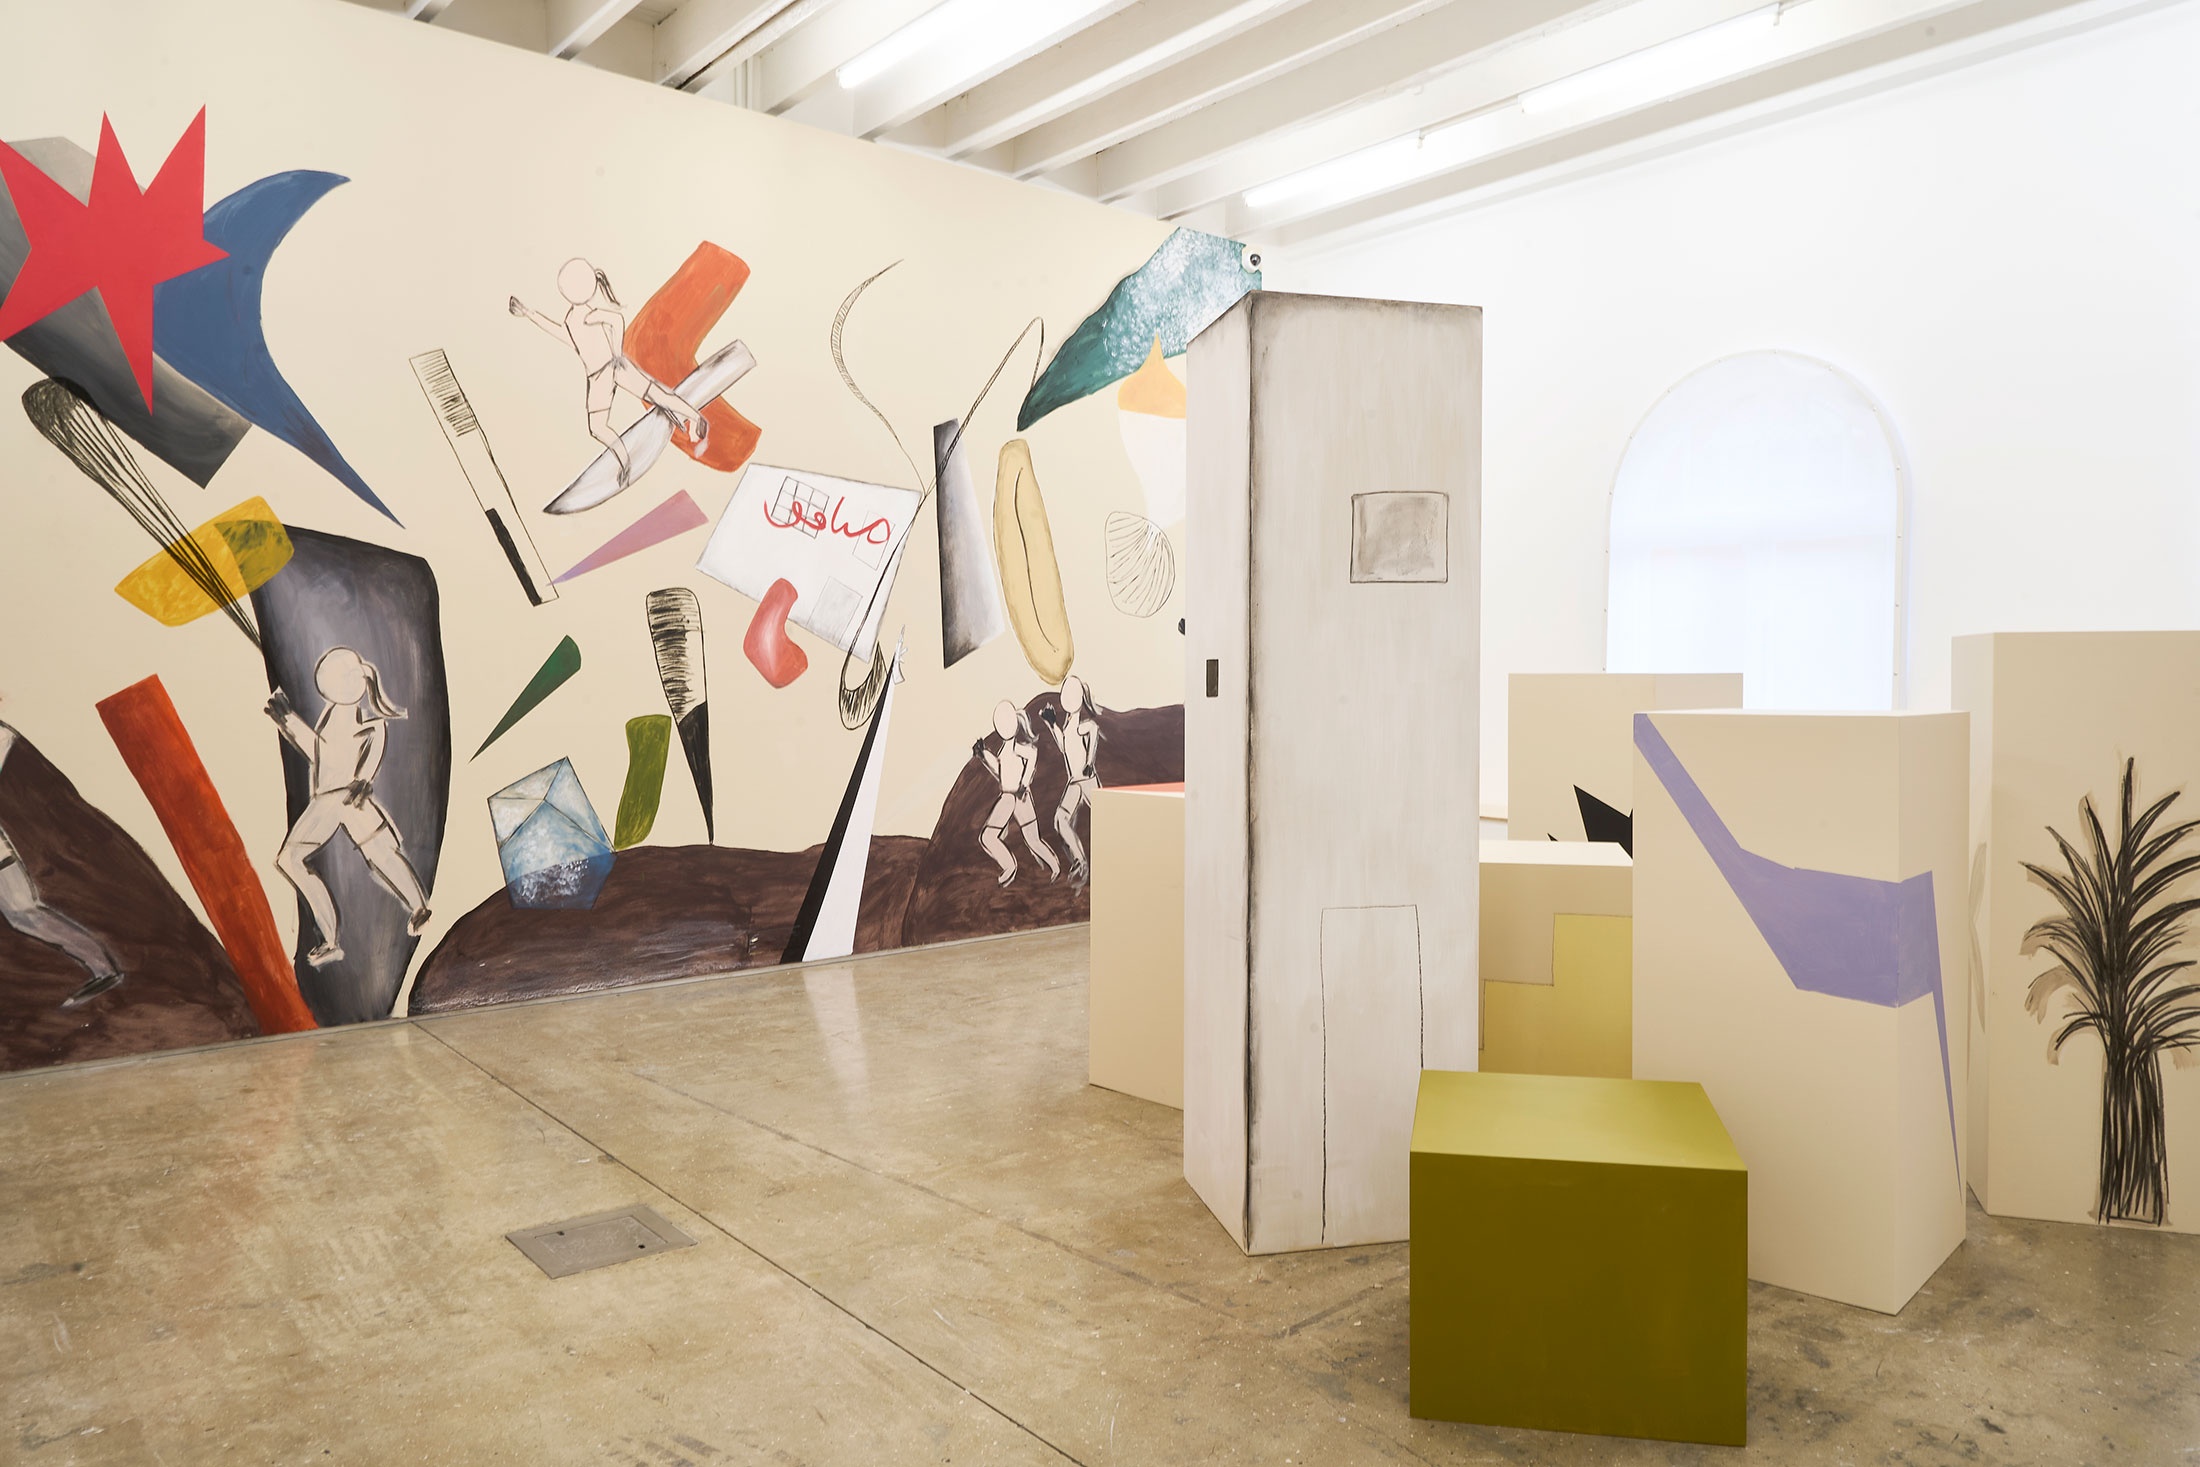 Installation photograph of the Common exhibition, featuring an installation by Hanna Noor Mahomed called ‘The Prodigal Daughter.’ On the right, a group of plinths painted with geometrical shapes and objects to resemble a city. At the back, a wall mural with four femme figures running amongst various objects and geometrical shapes.
